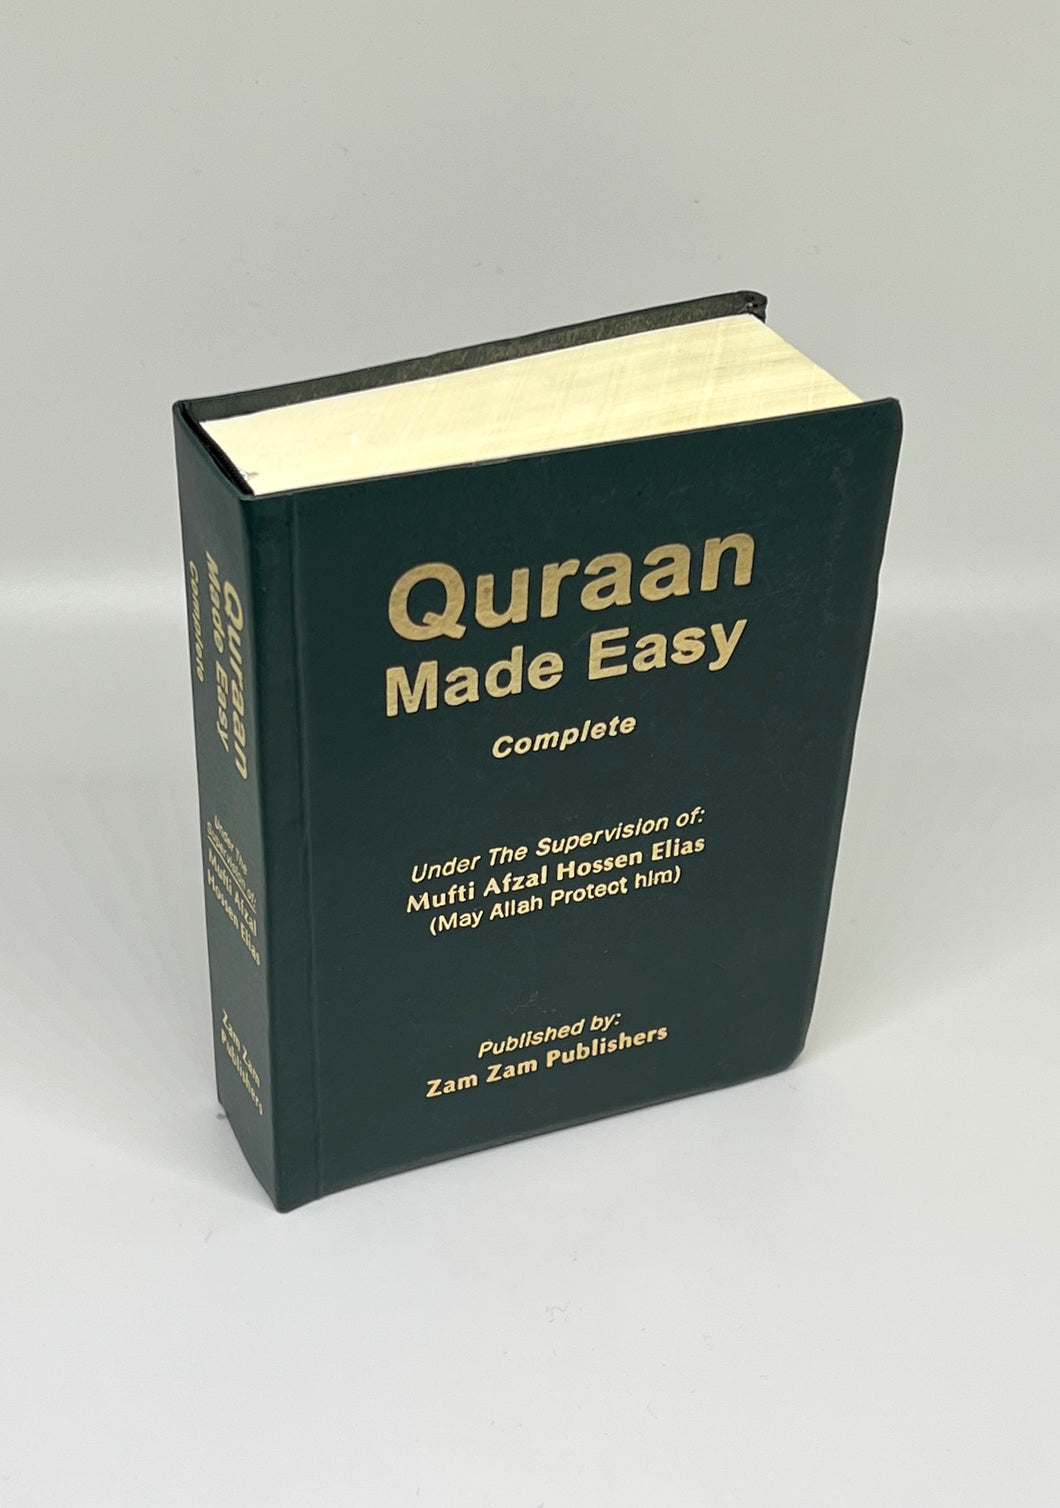 Quraan made easy